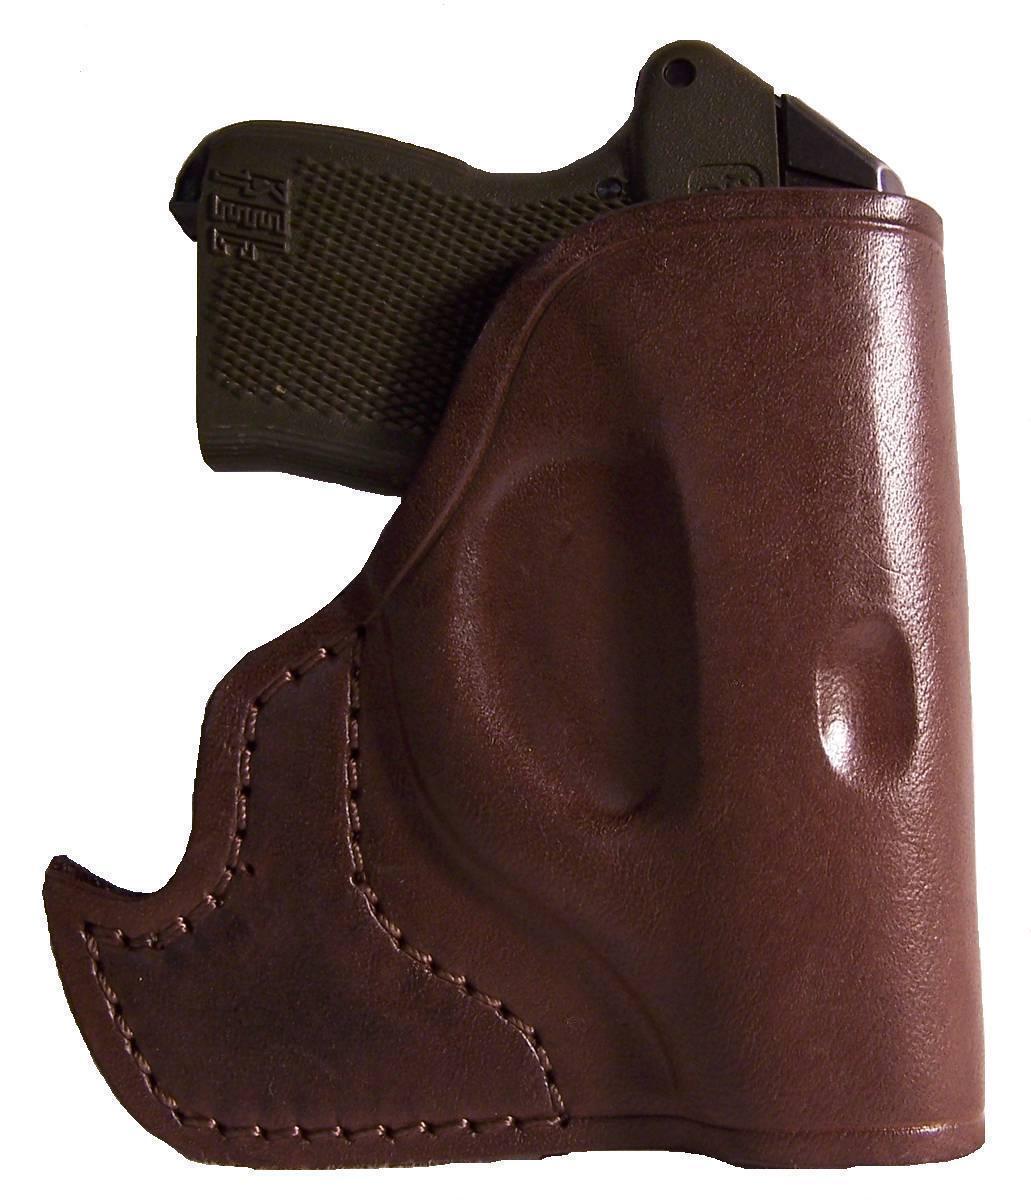  Ruger LCP-380 Leather Front Pocket Gun holster R or L HAND USE